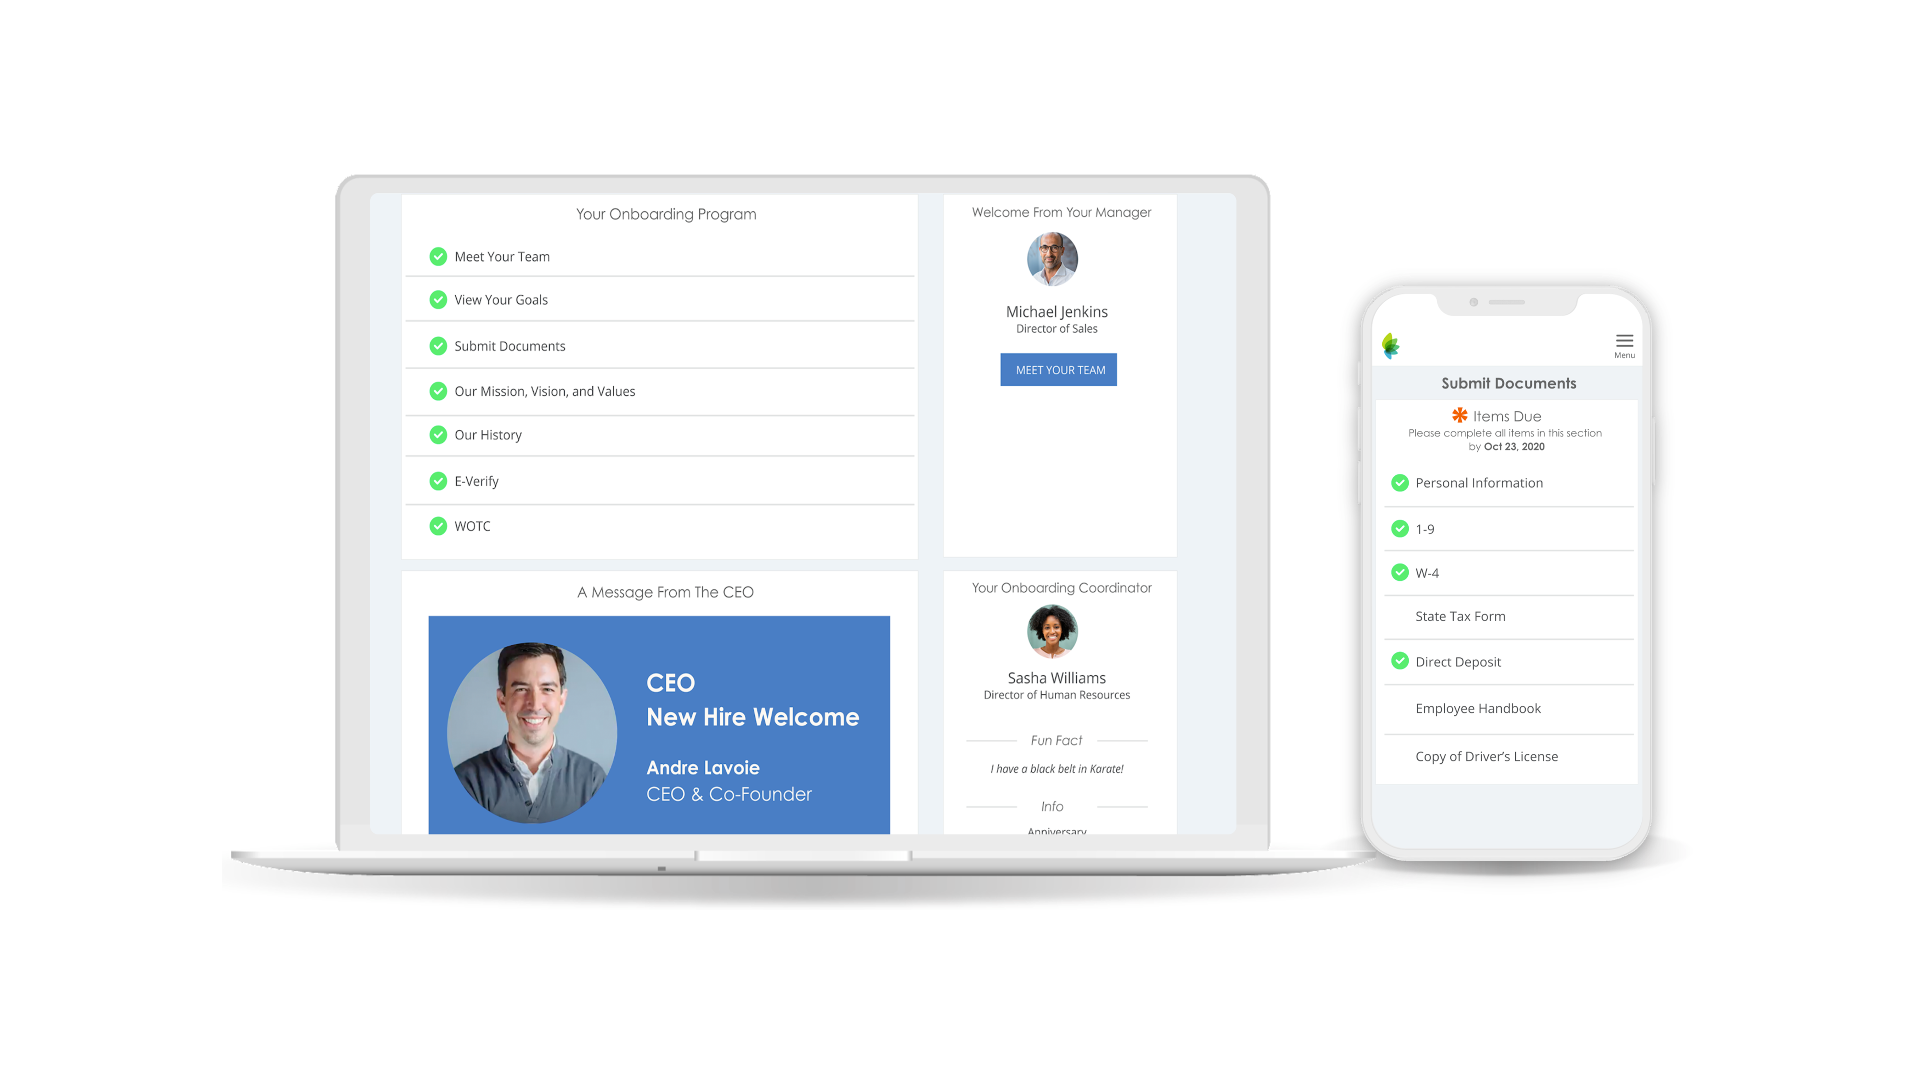 Clear Company allows new hires to easily track their progress through onboarding. Image via Clear Company